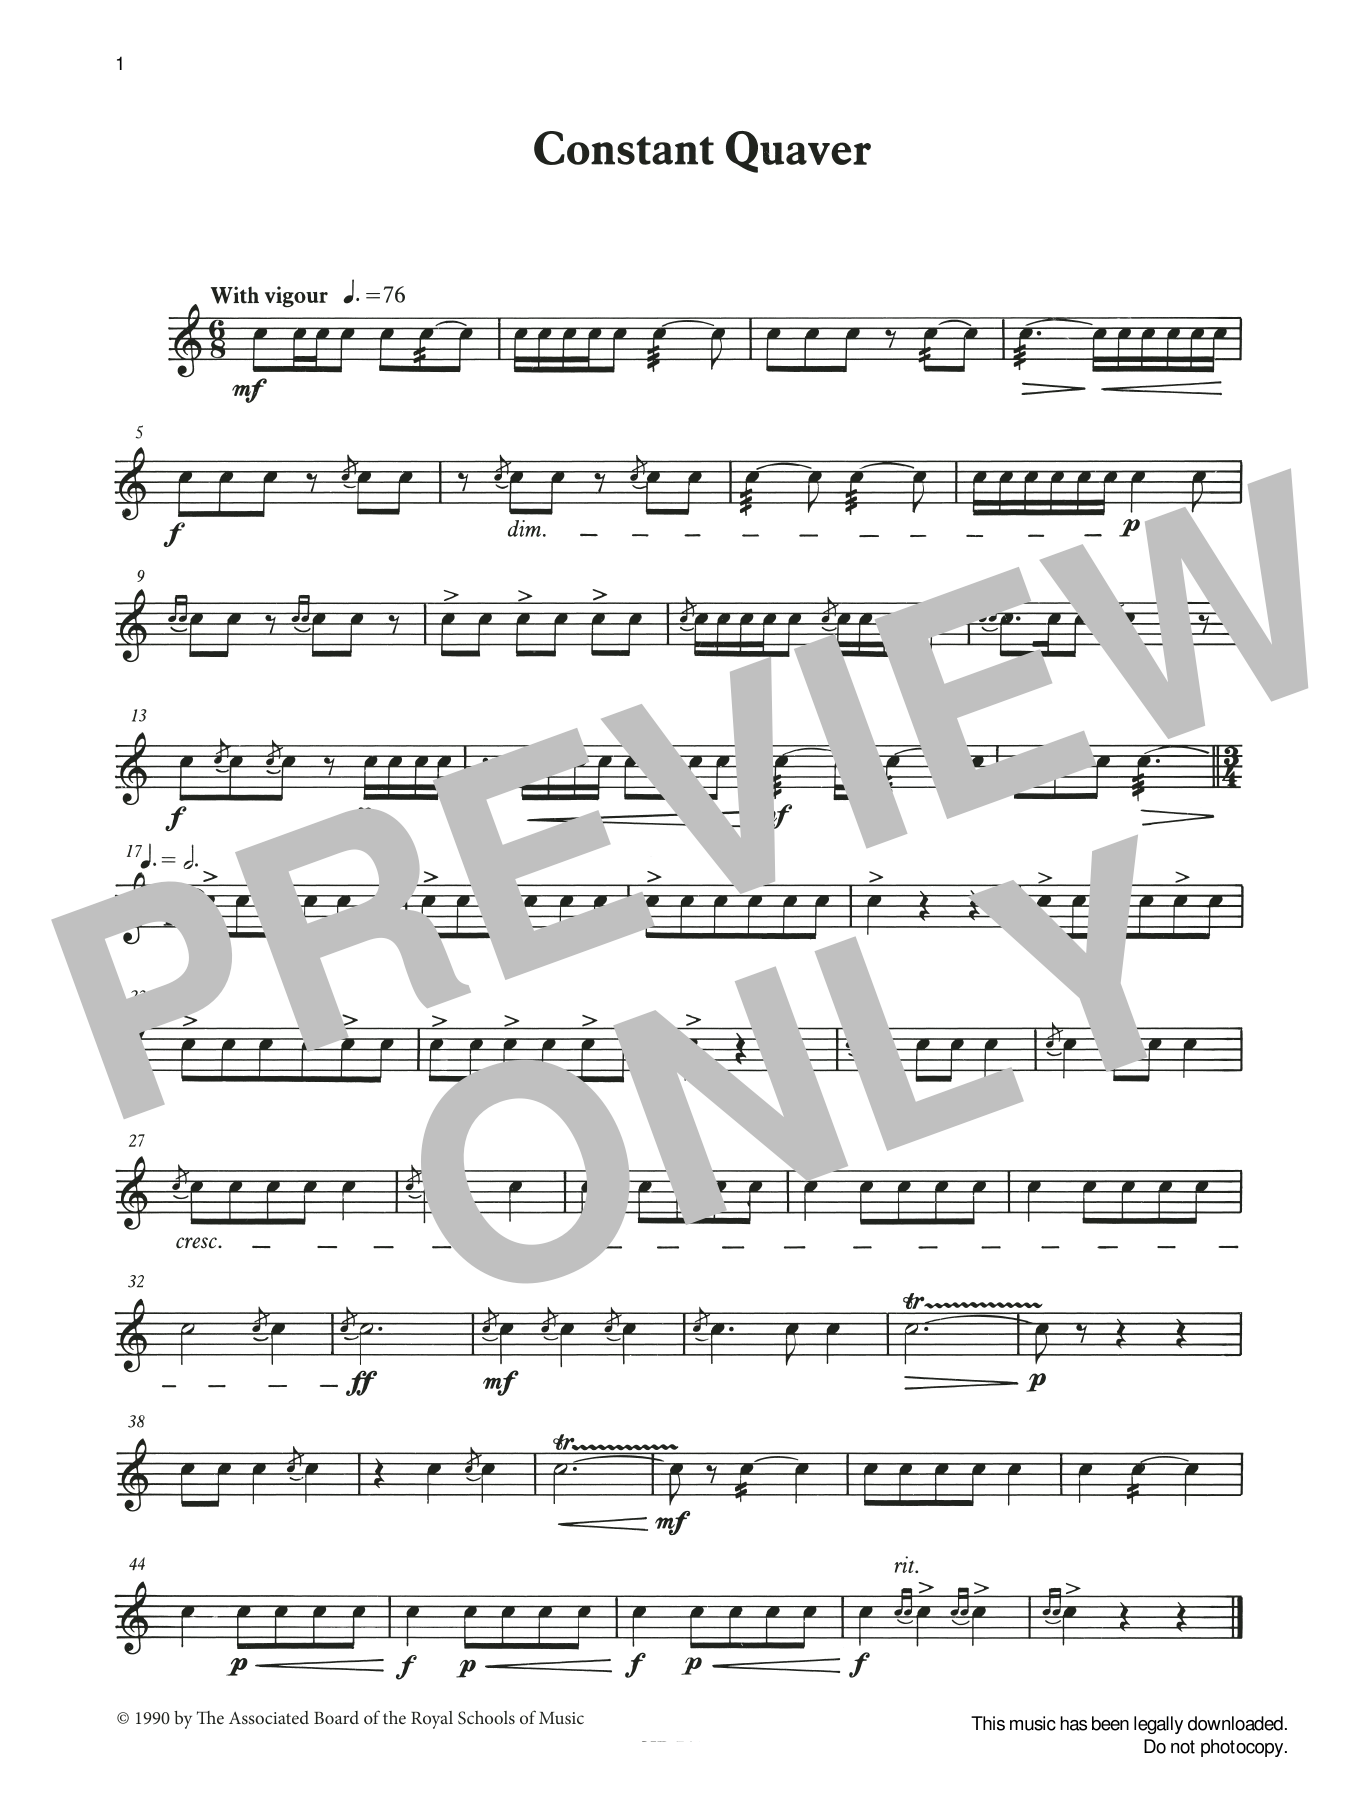 Download Ian Wright and Kevin Hathaway Constant Quaver from Graded Music for S Sheet Music